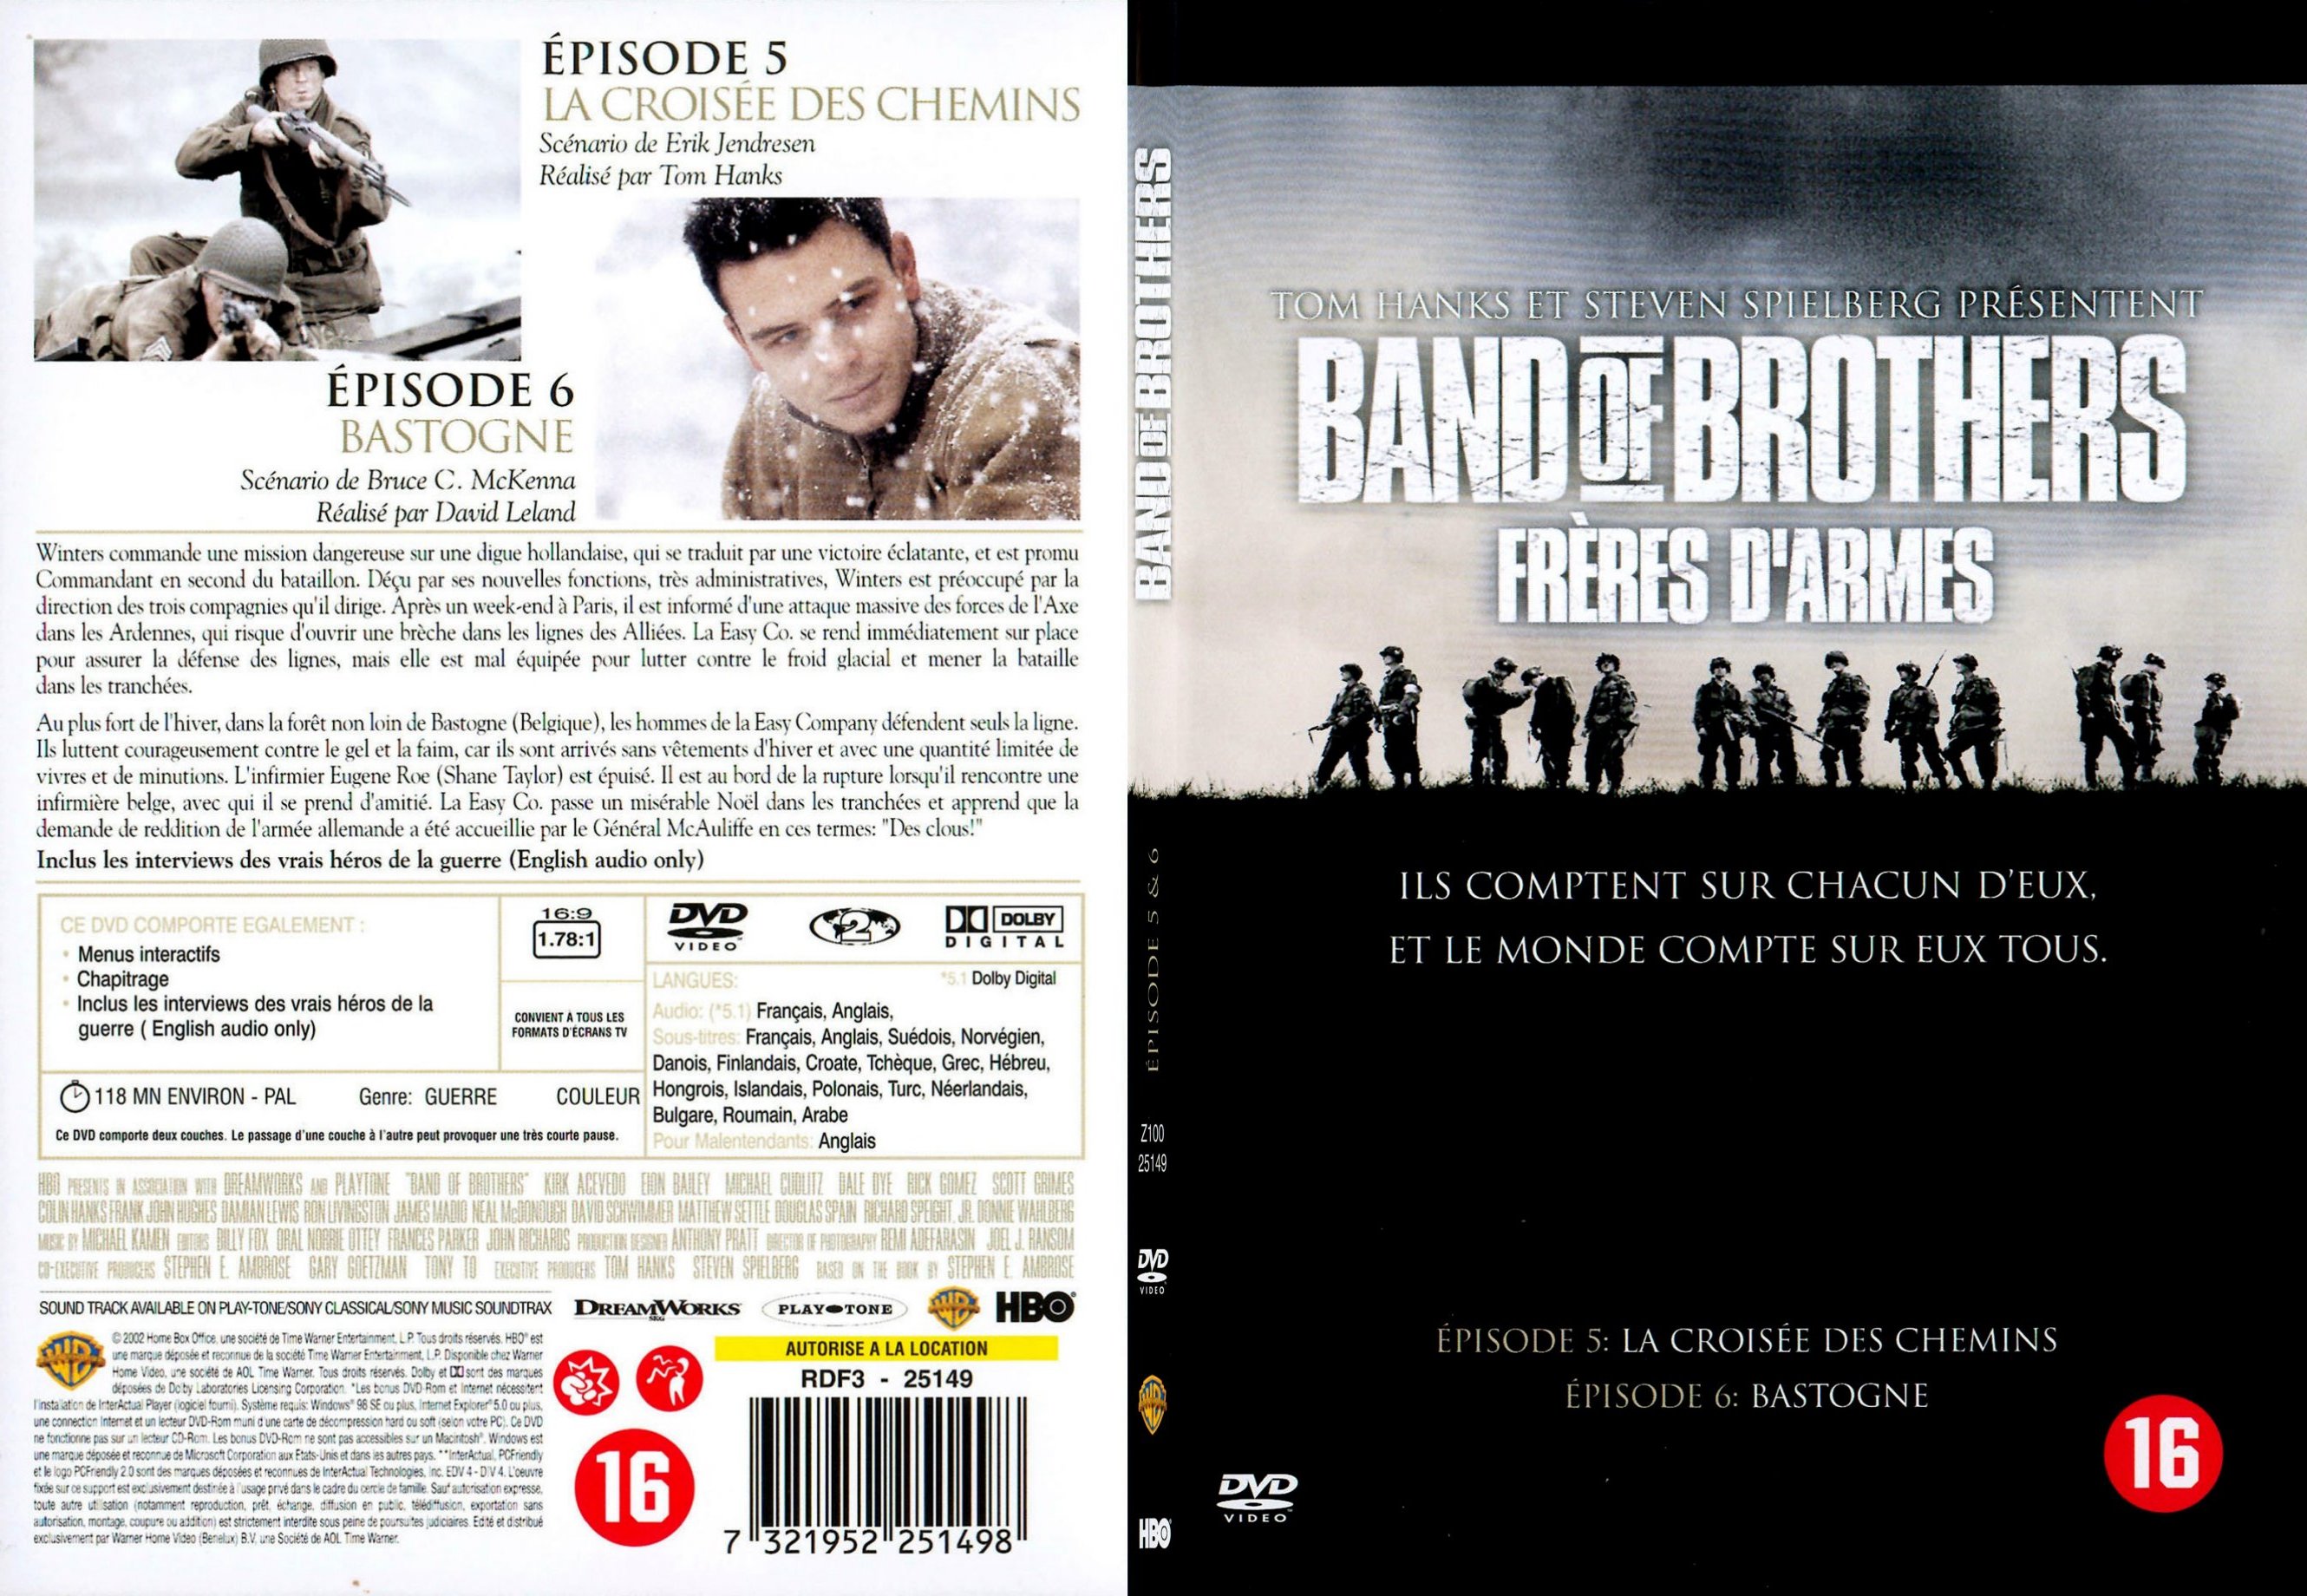 Jaquette DVD Band of brothers vol 3 - SLIM